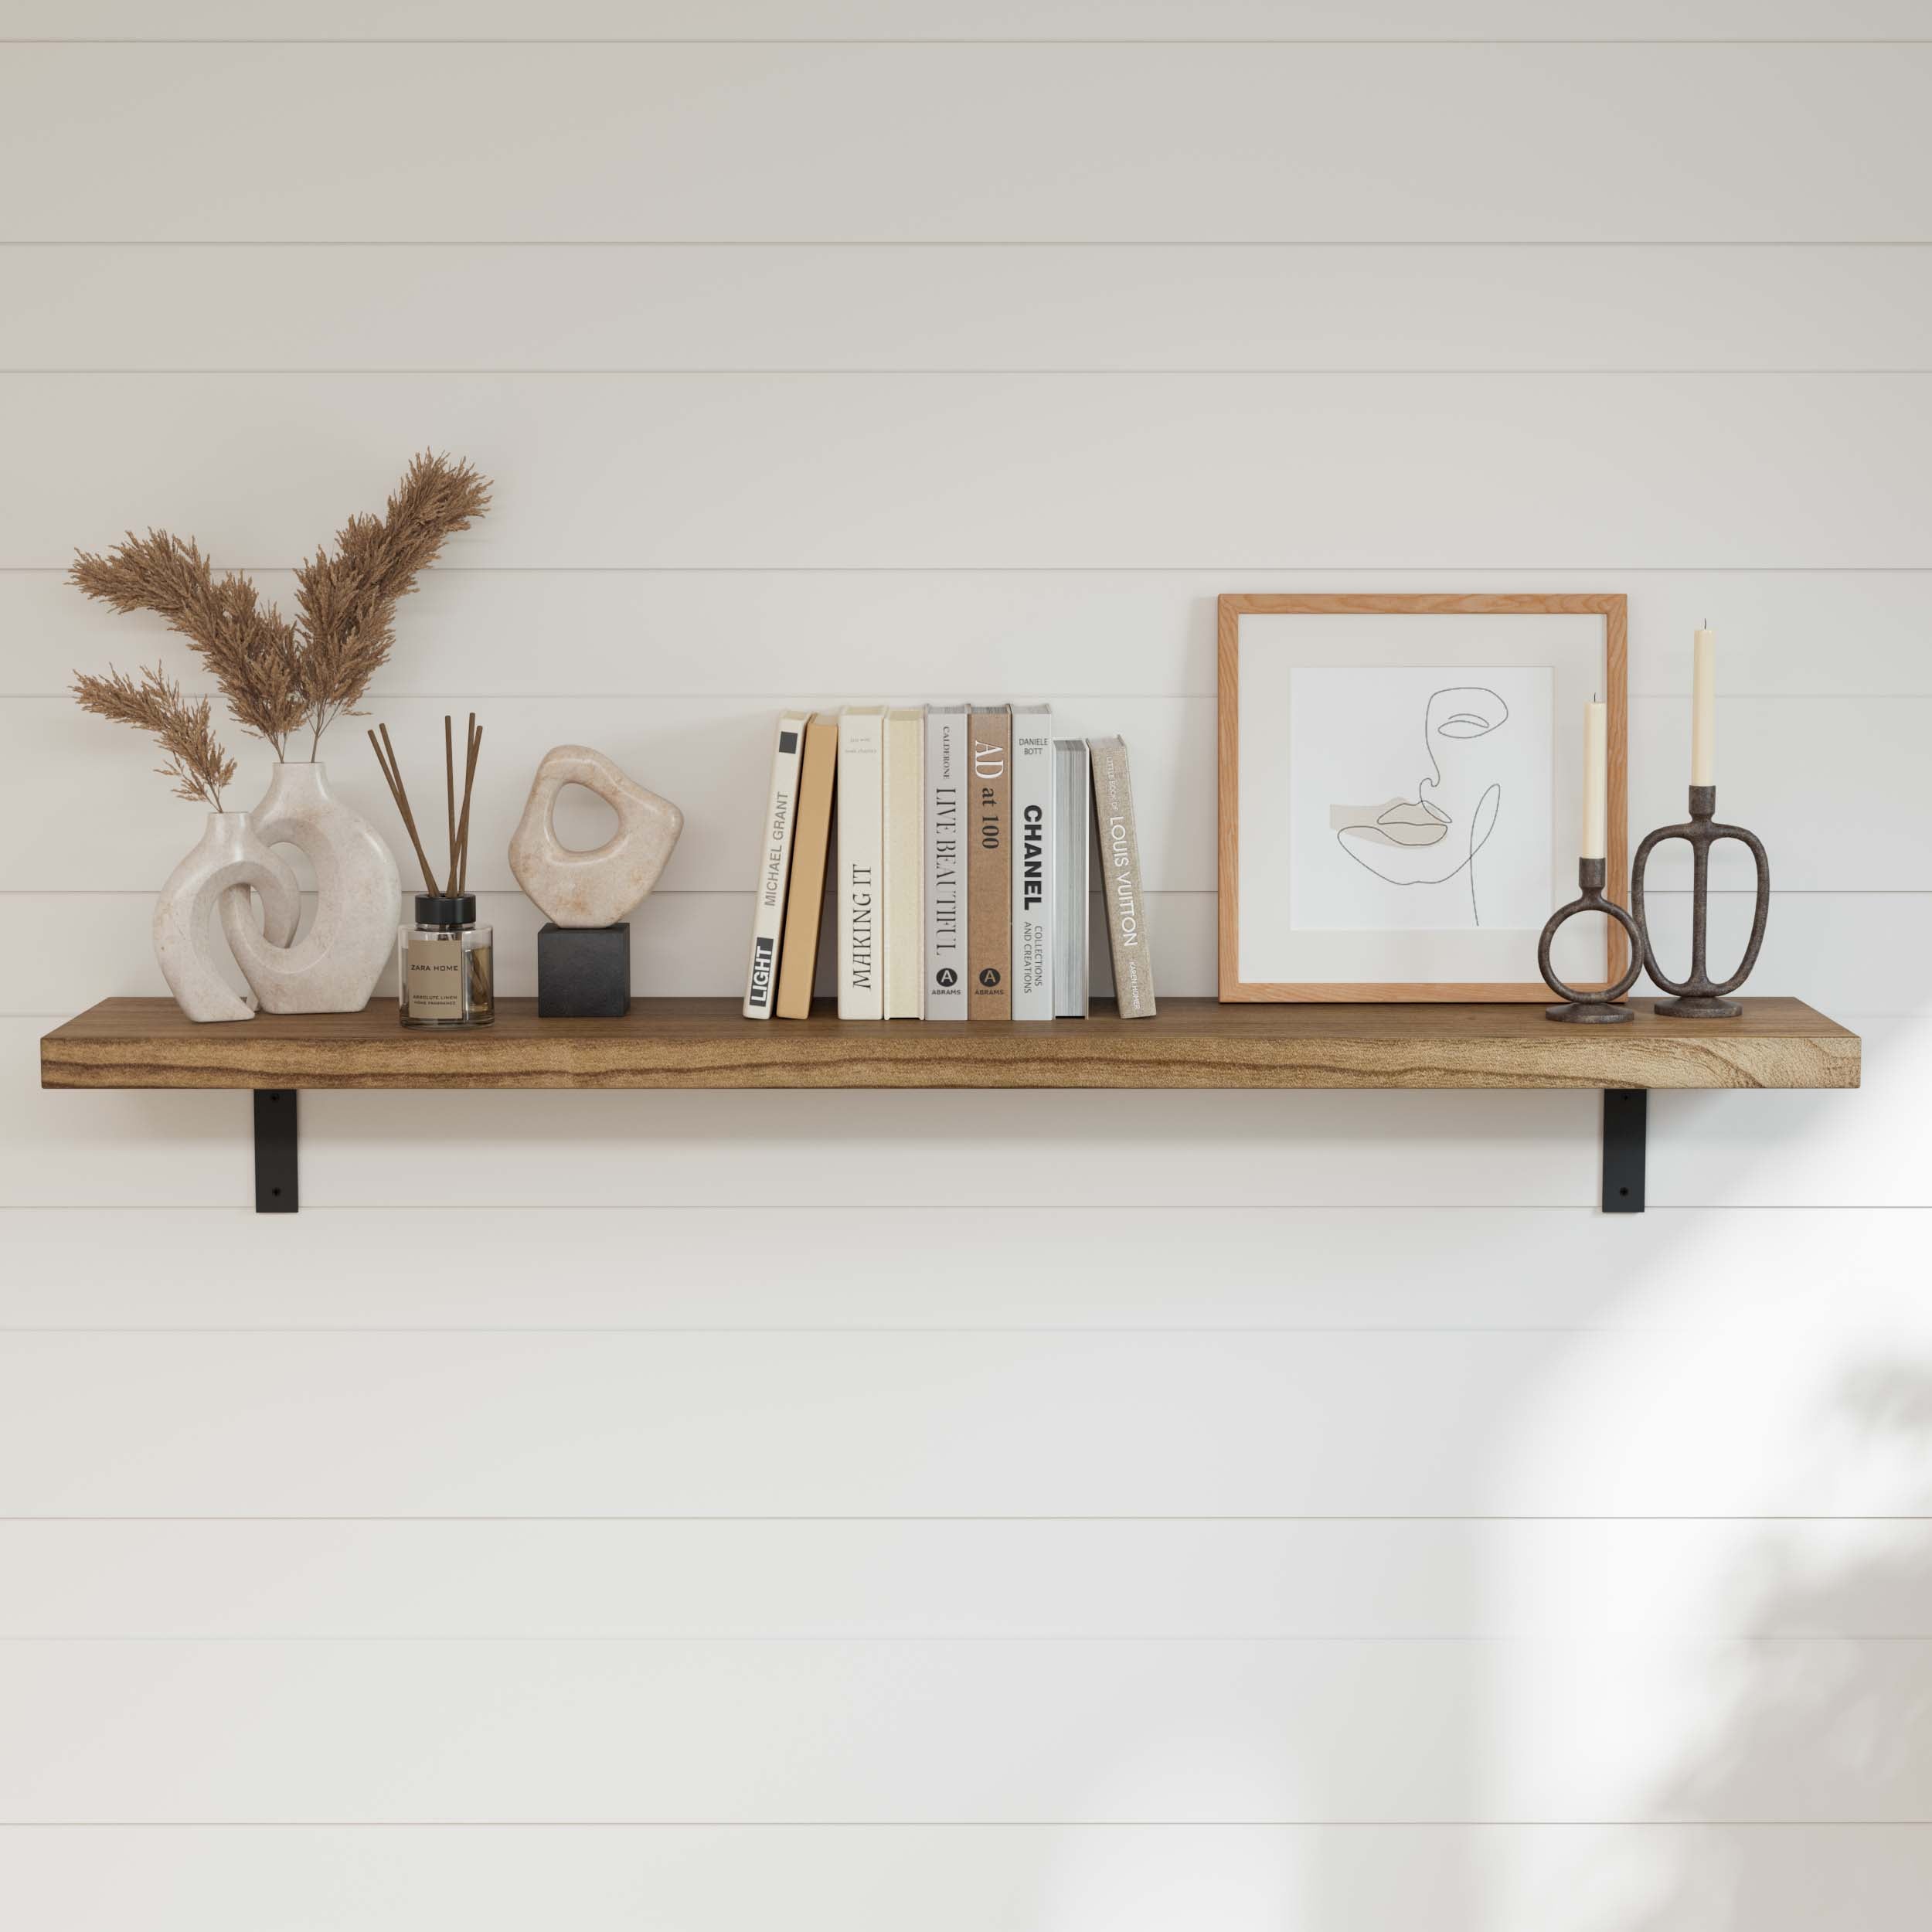 A stylish hanging shelf for wall with artistic decor, including sculptures, pampas grass, a reed diffuser, books, a framed line drawing, and candle holders.